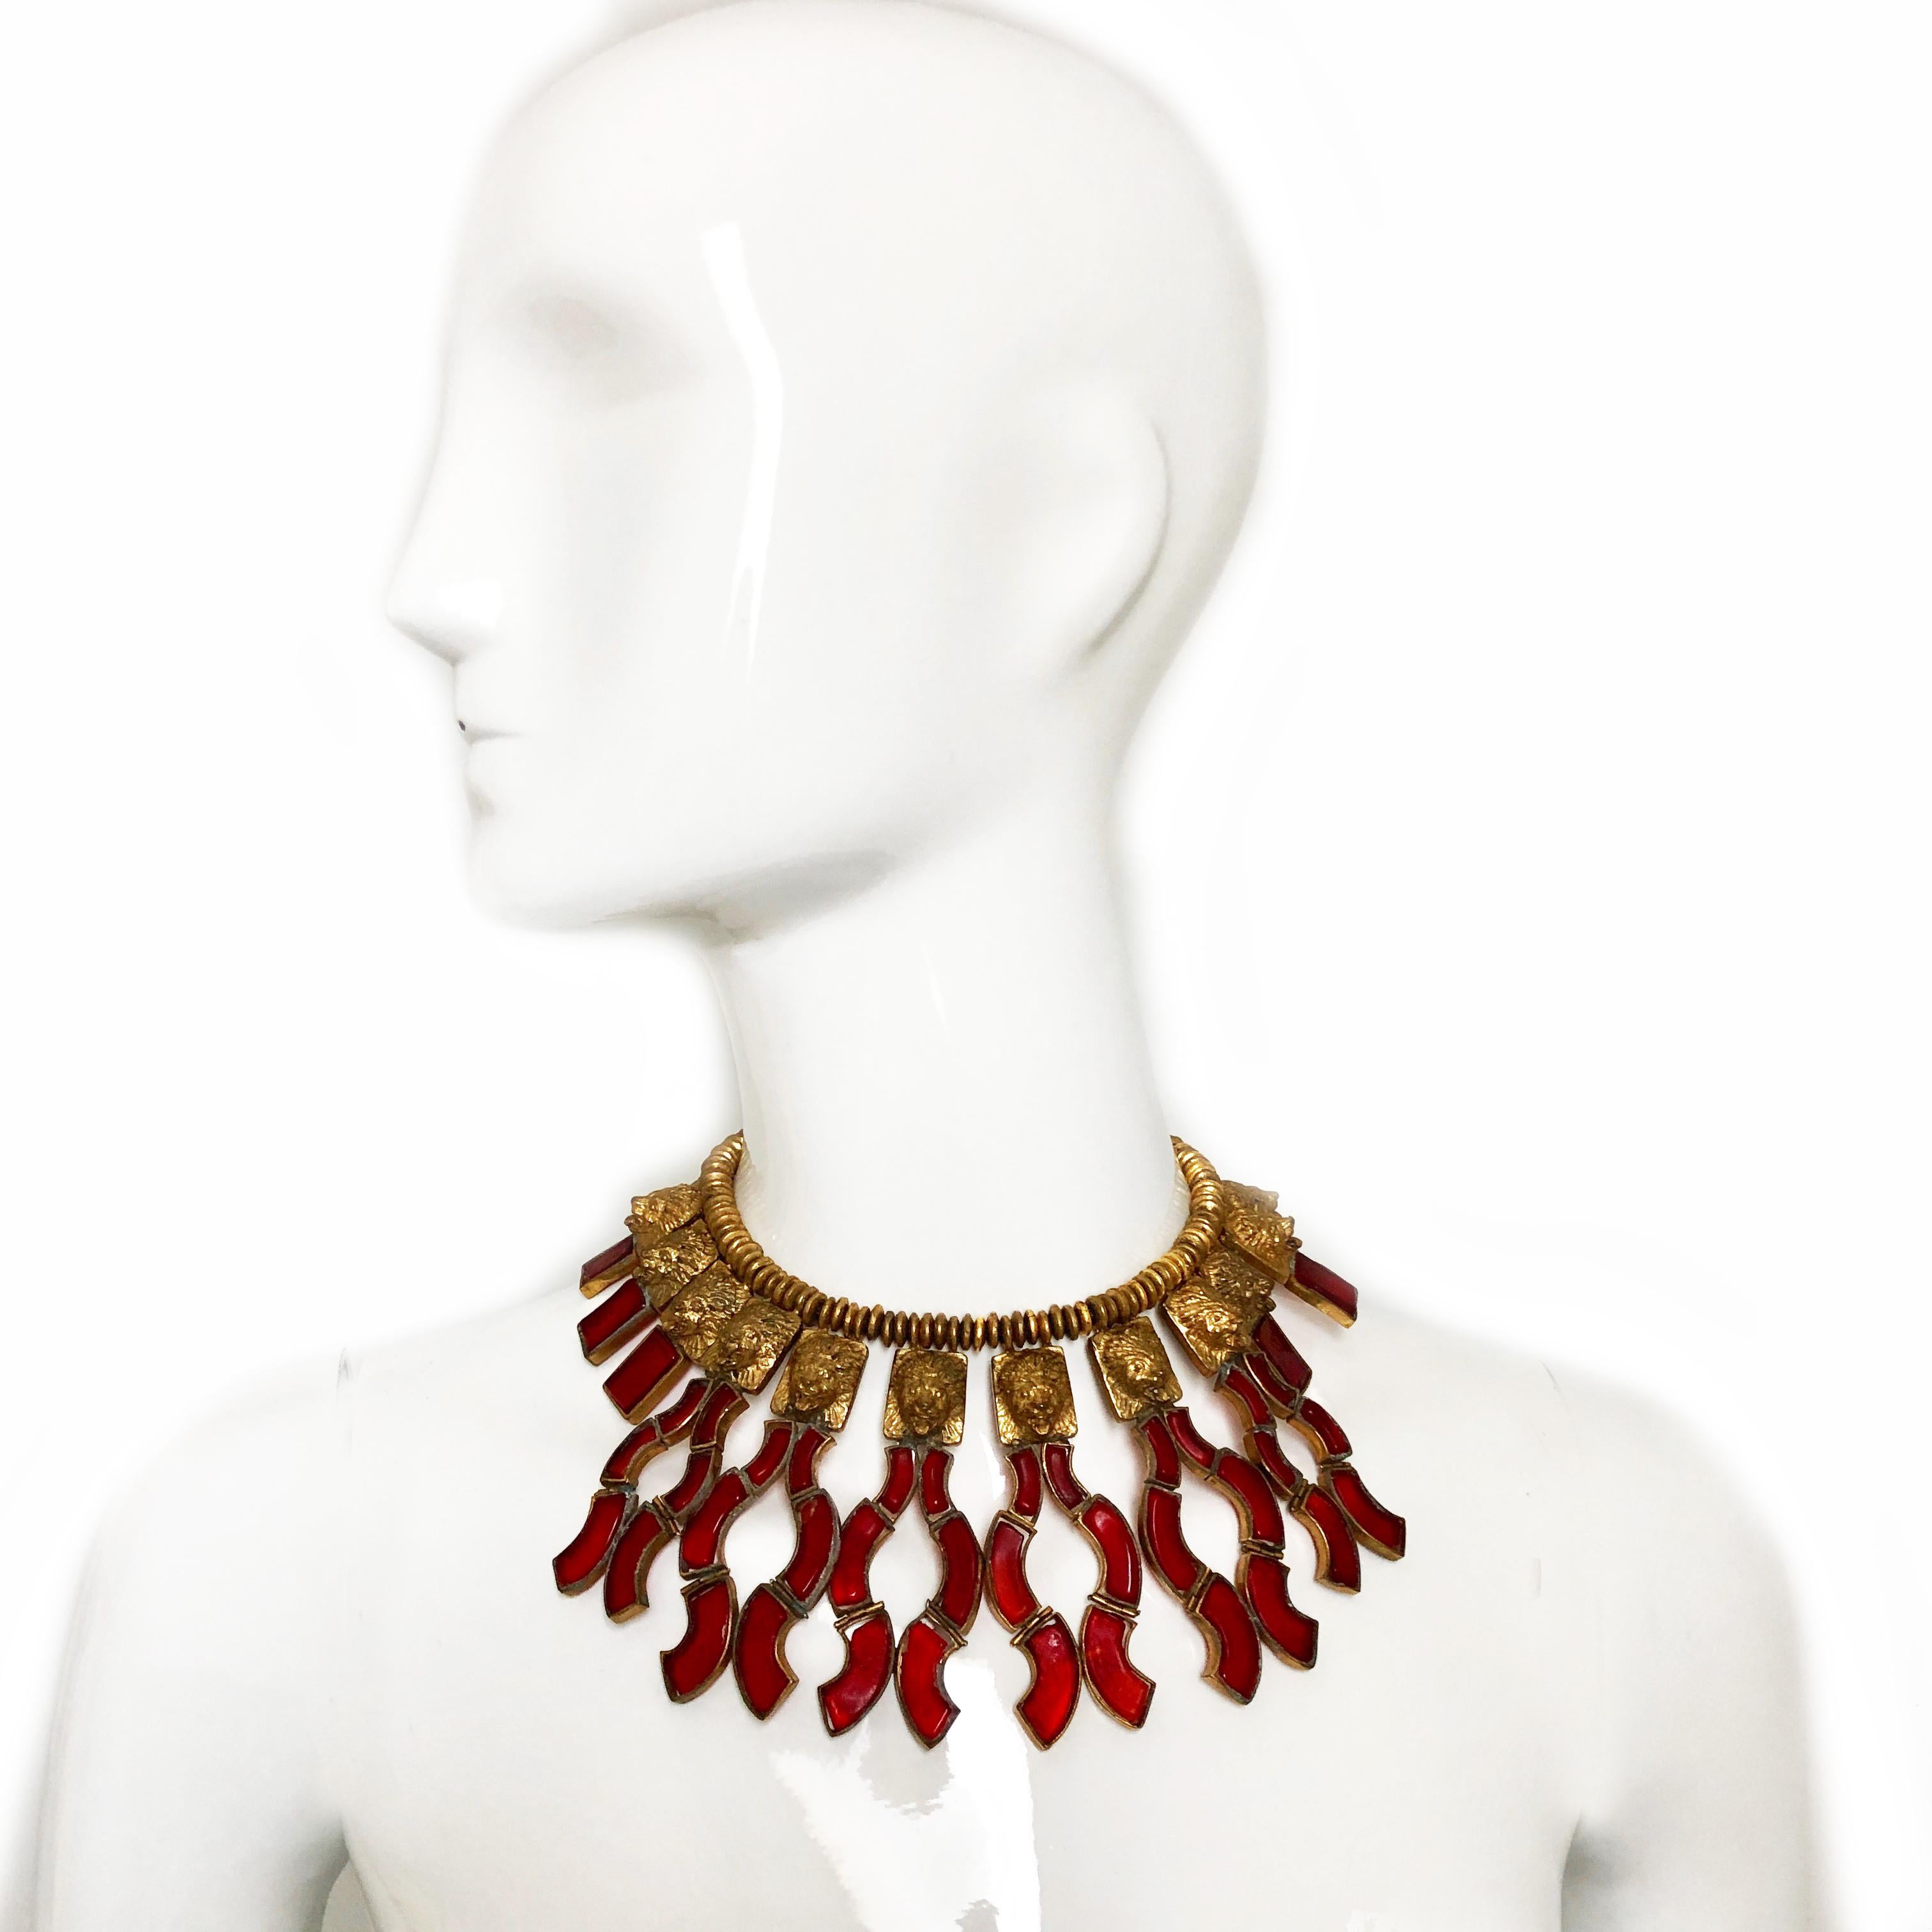 This important Goossens for Chanel demi-parure includes an incredible gilt metal and red pâte de verre (poured glass) lion head fringe necklace with matching clip style earrings. Incredibly rare, we have yet to see another set in this style and